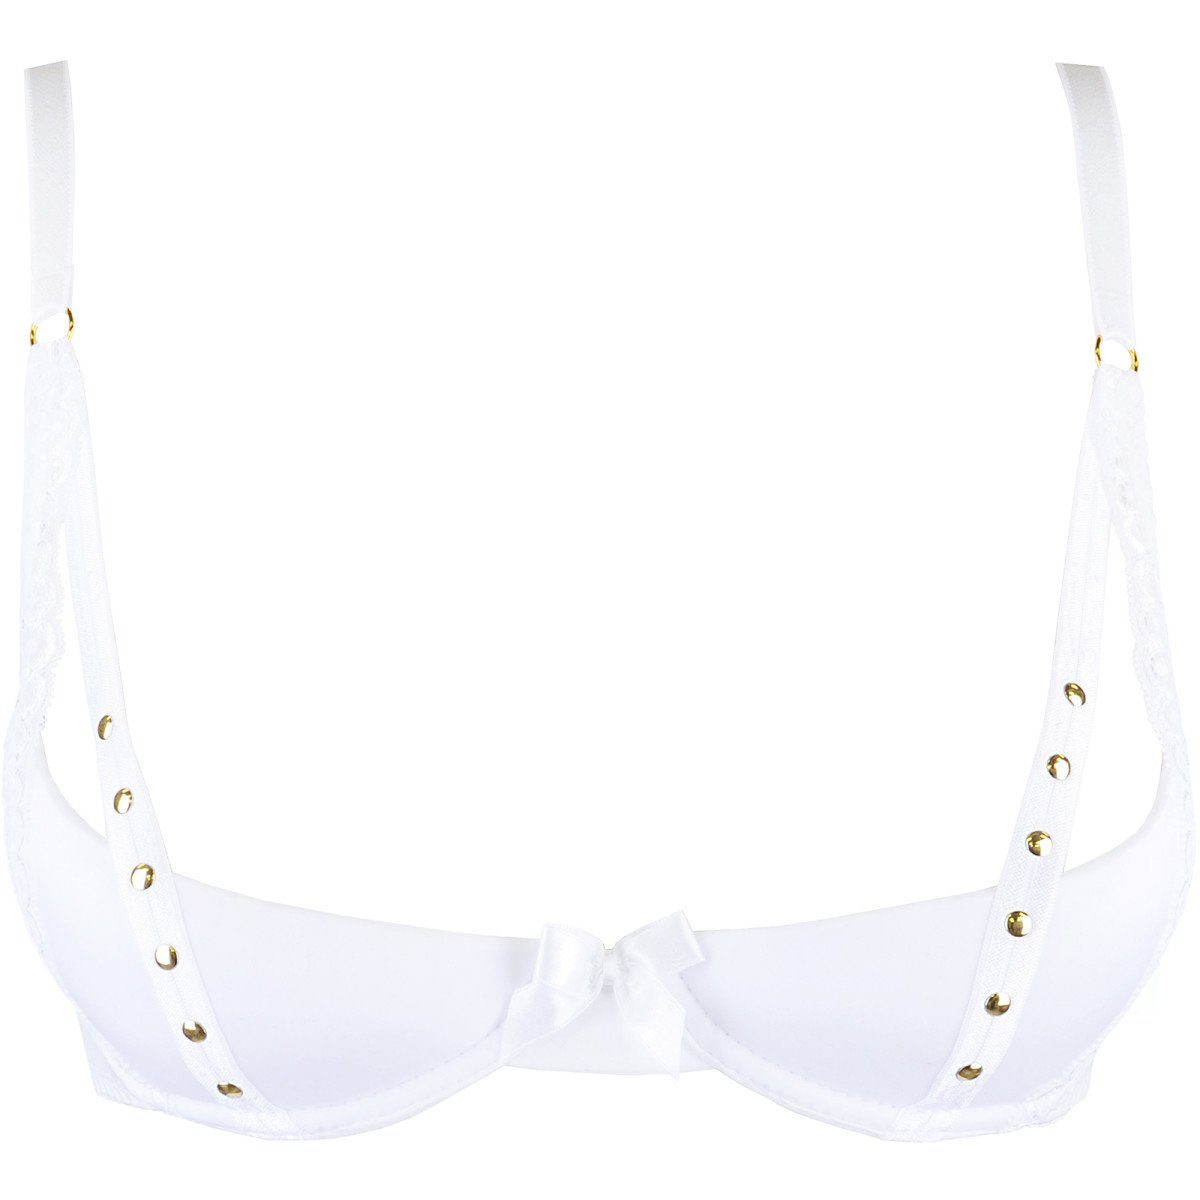 V-9791 open (L,M,S,XL) with Axami bra white cups - Bustier